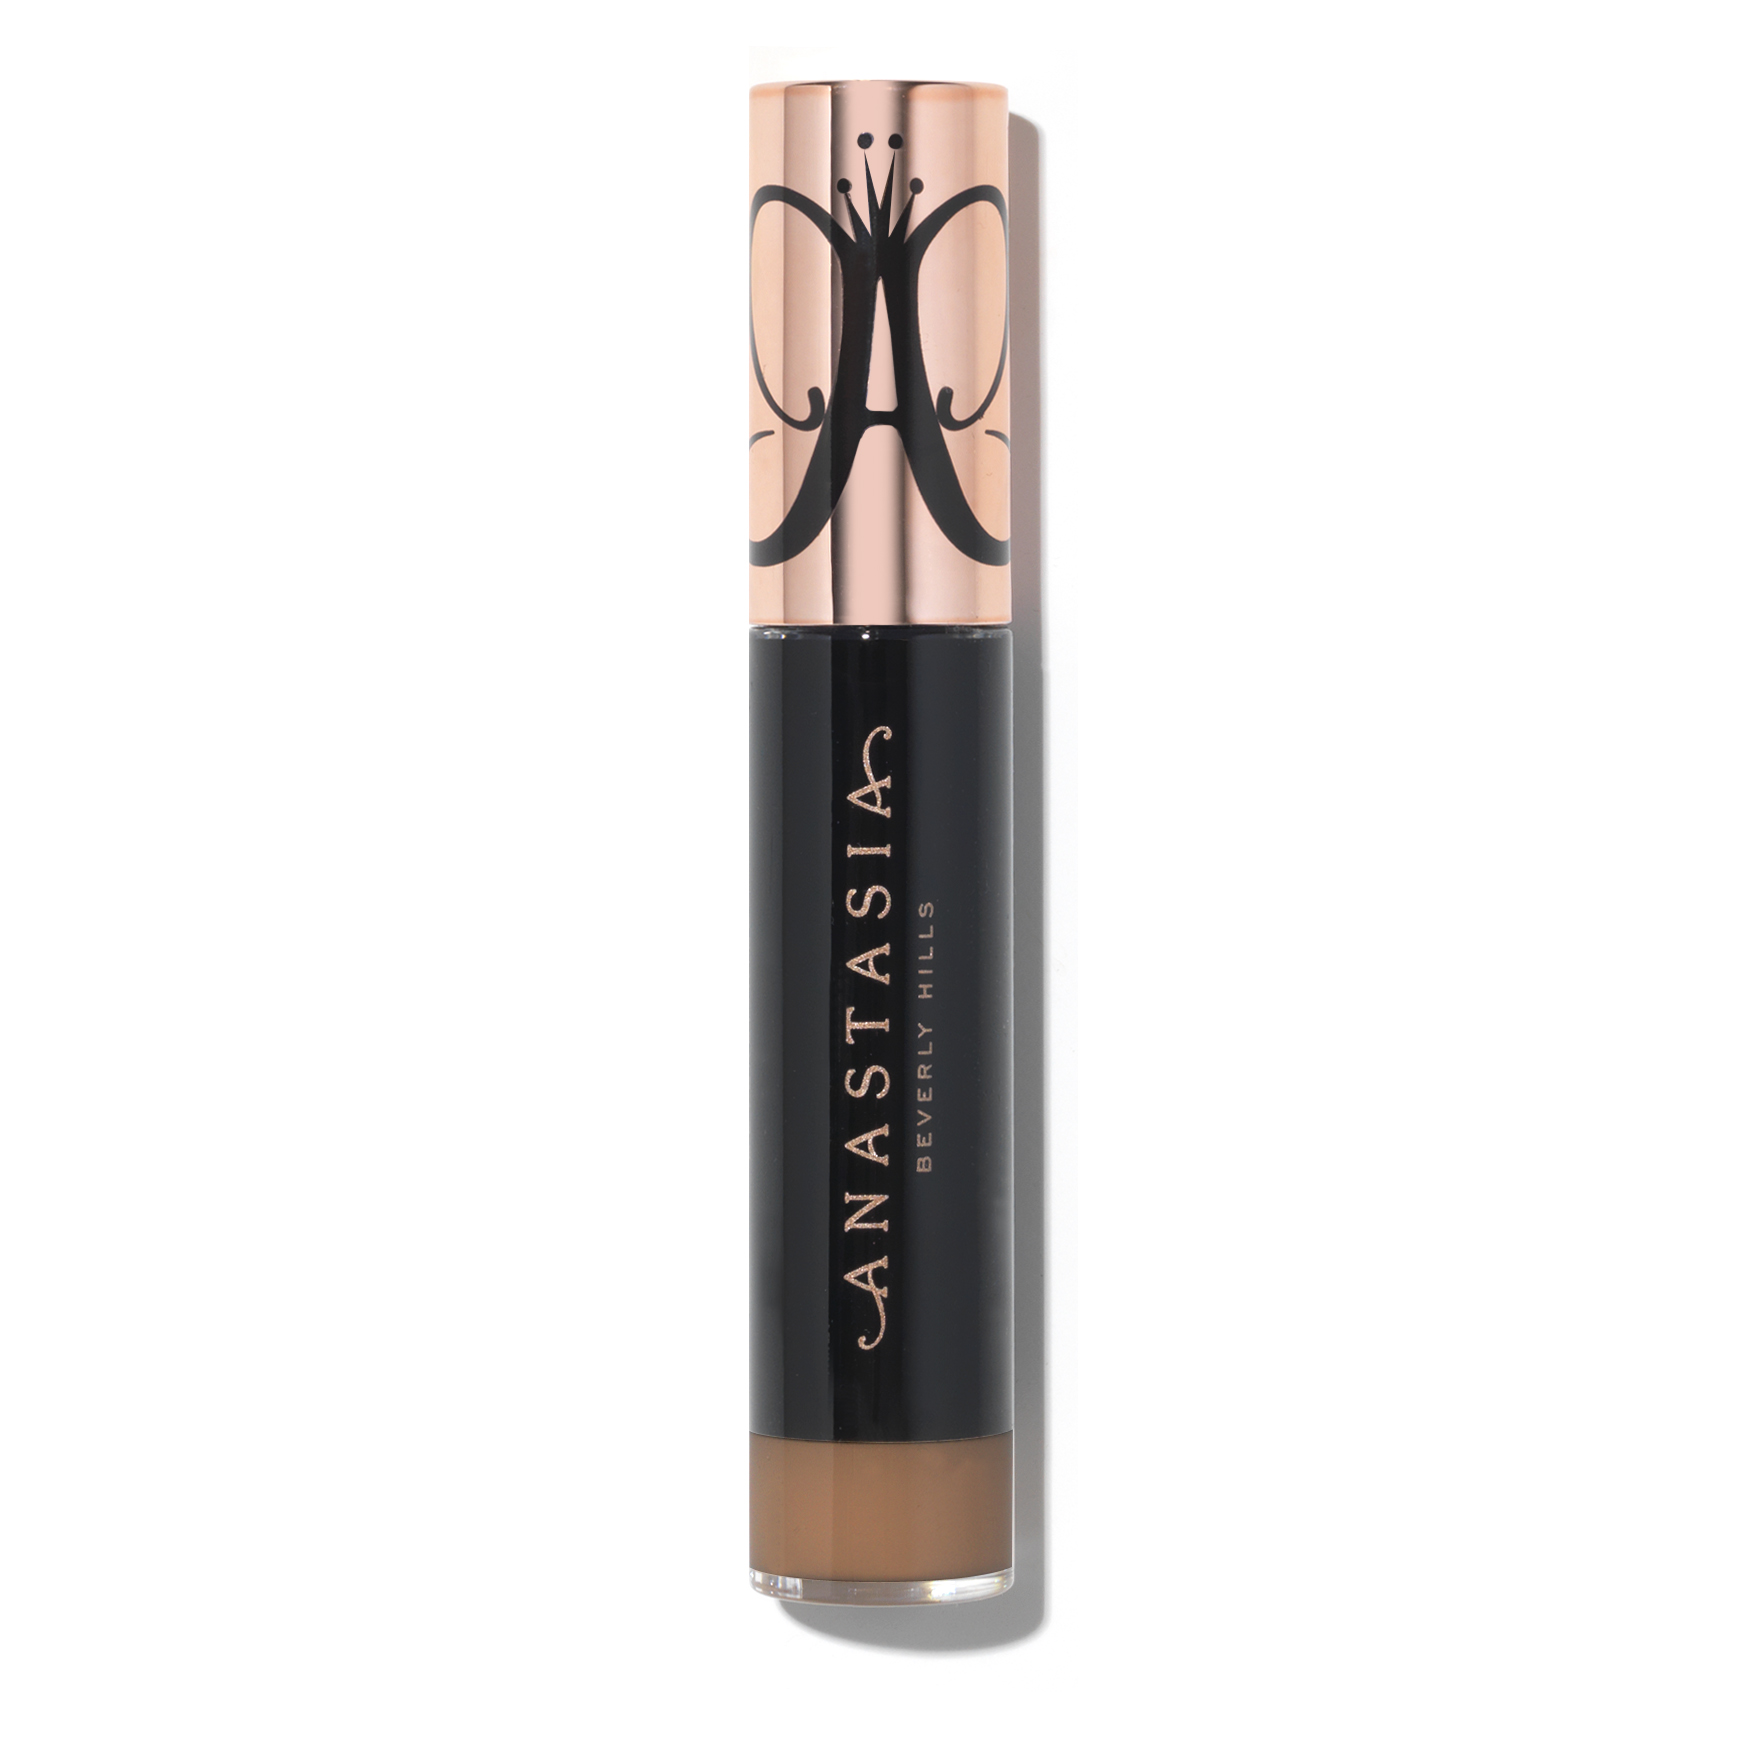 Anastasia Beverly Hills Magic Touch Concealer | Space NK